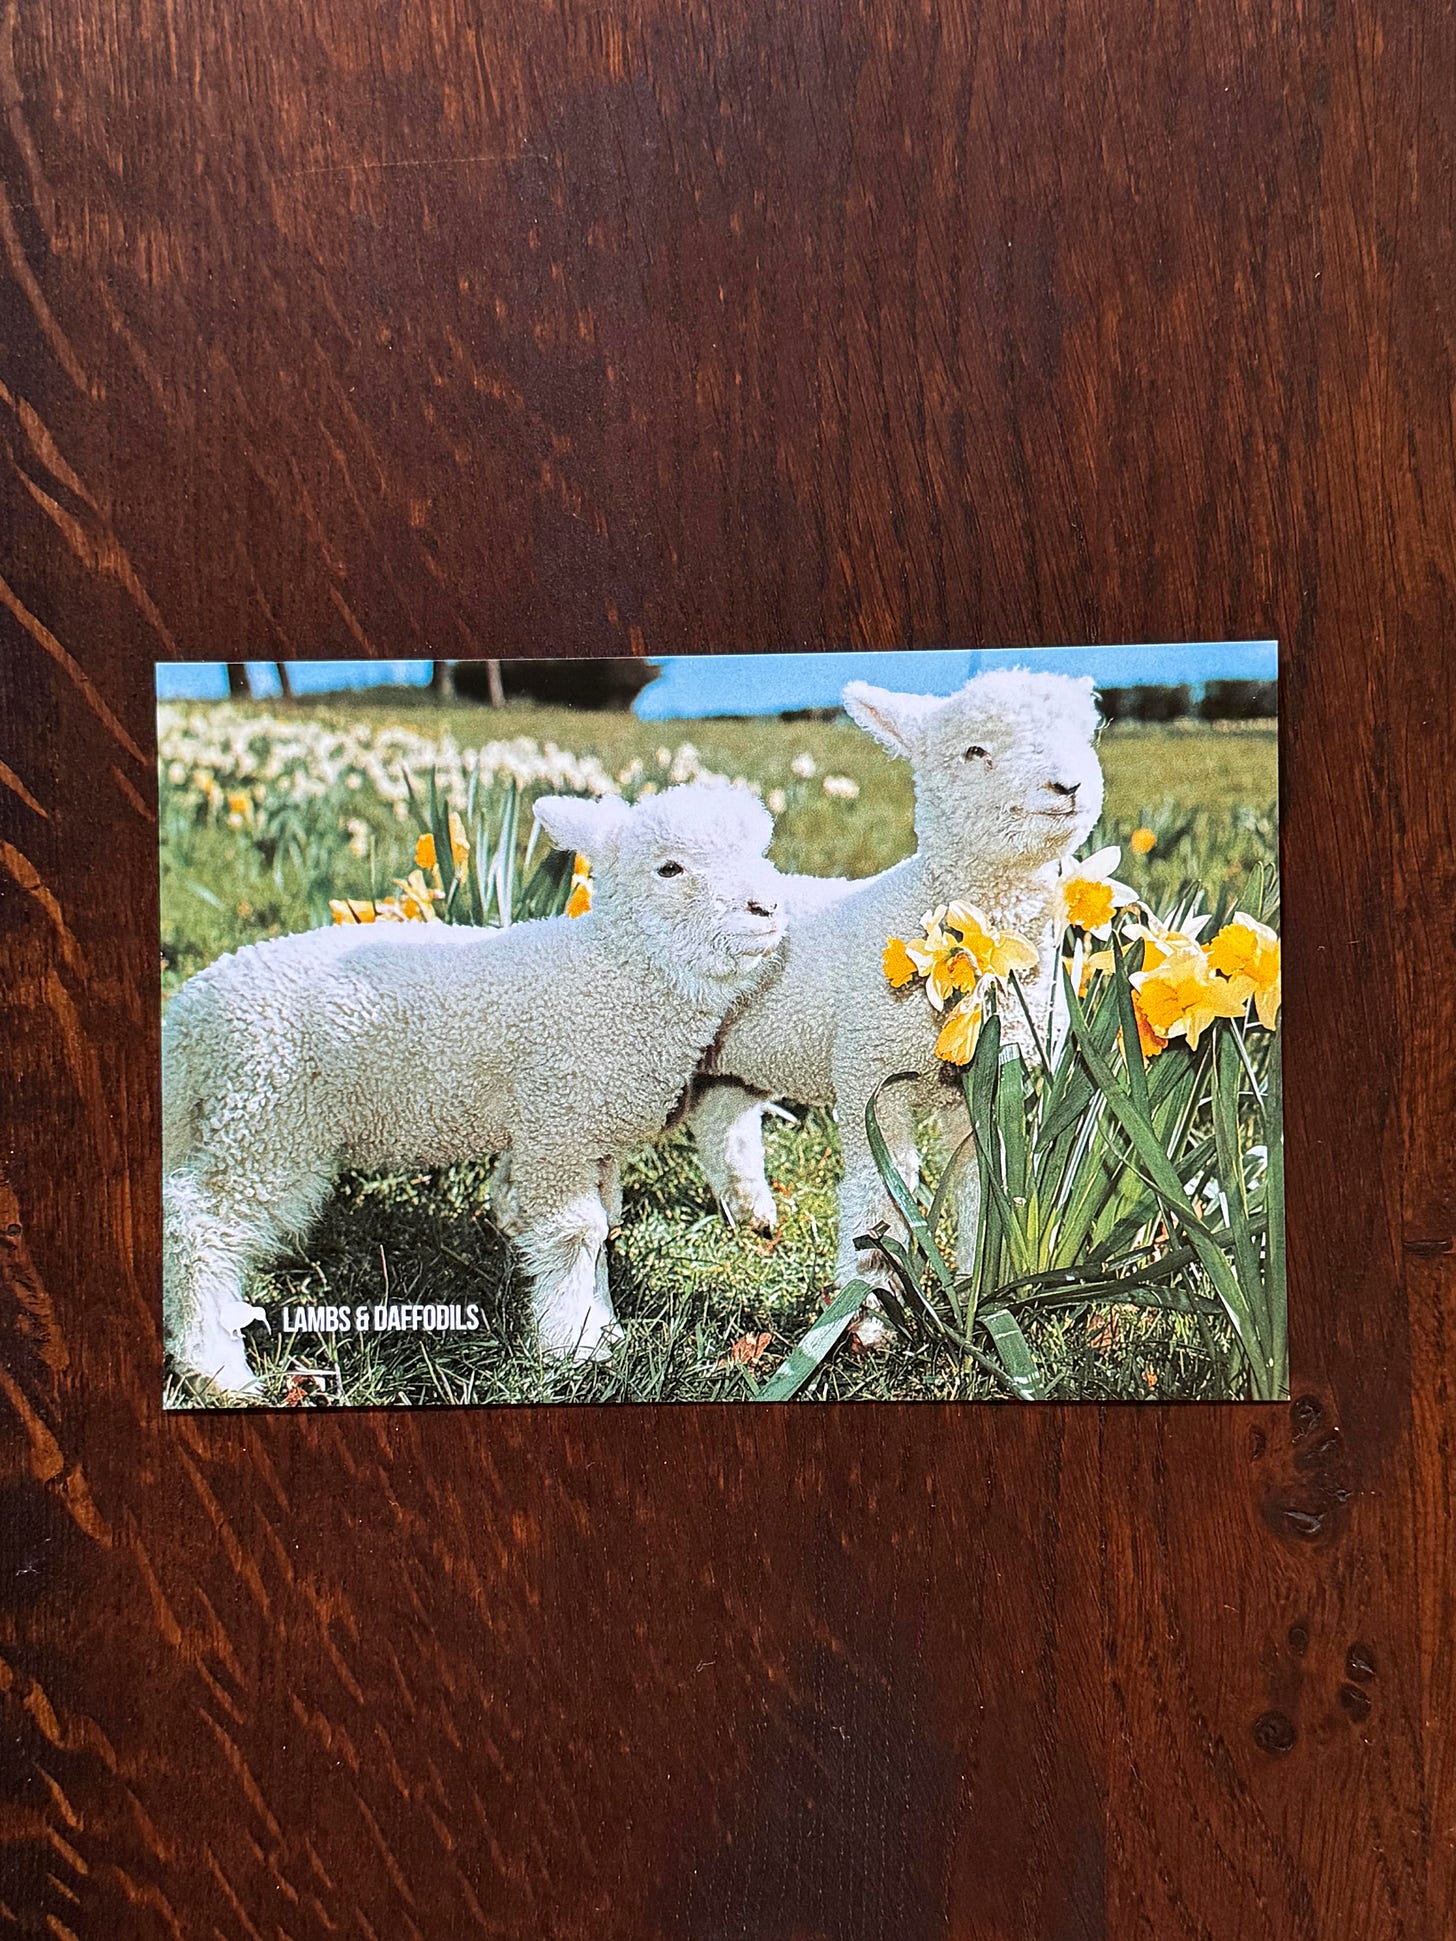 A postcard depicting two lambs in a field of daffodils.